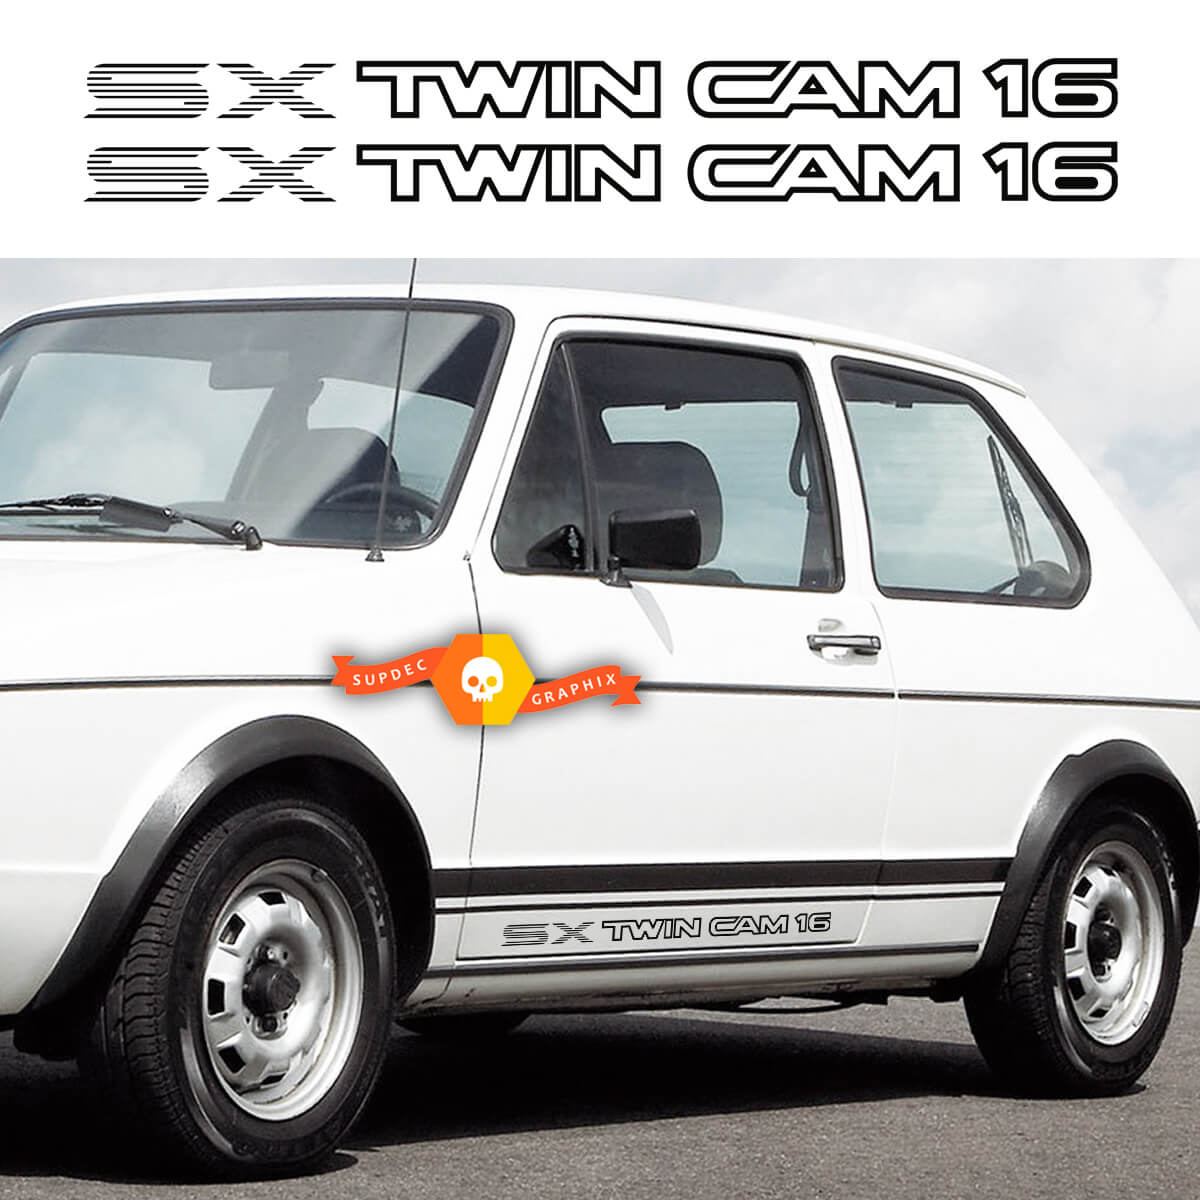 Toyota Pair AE93 Corolla SX TWIN CAM 16 doors side graphics decal sticker